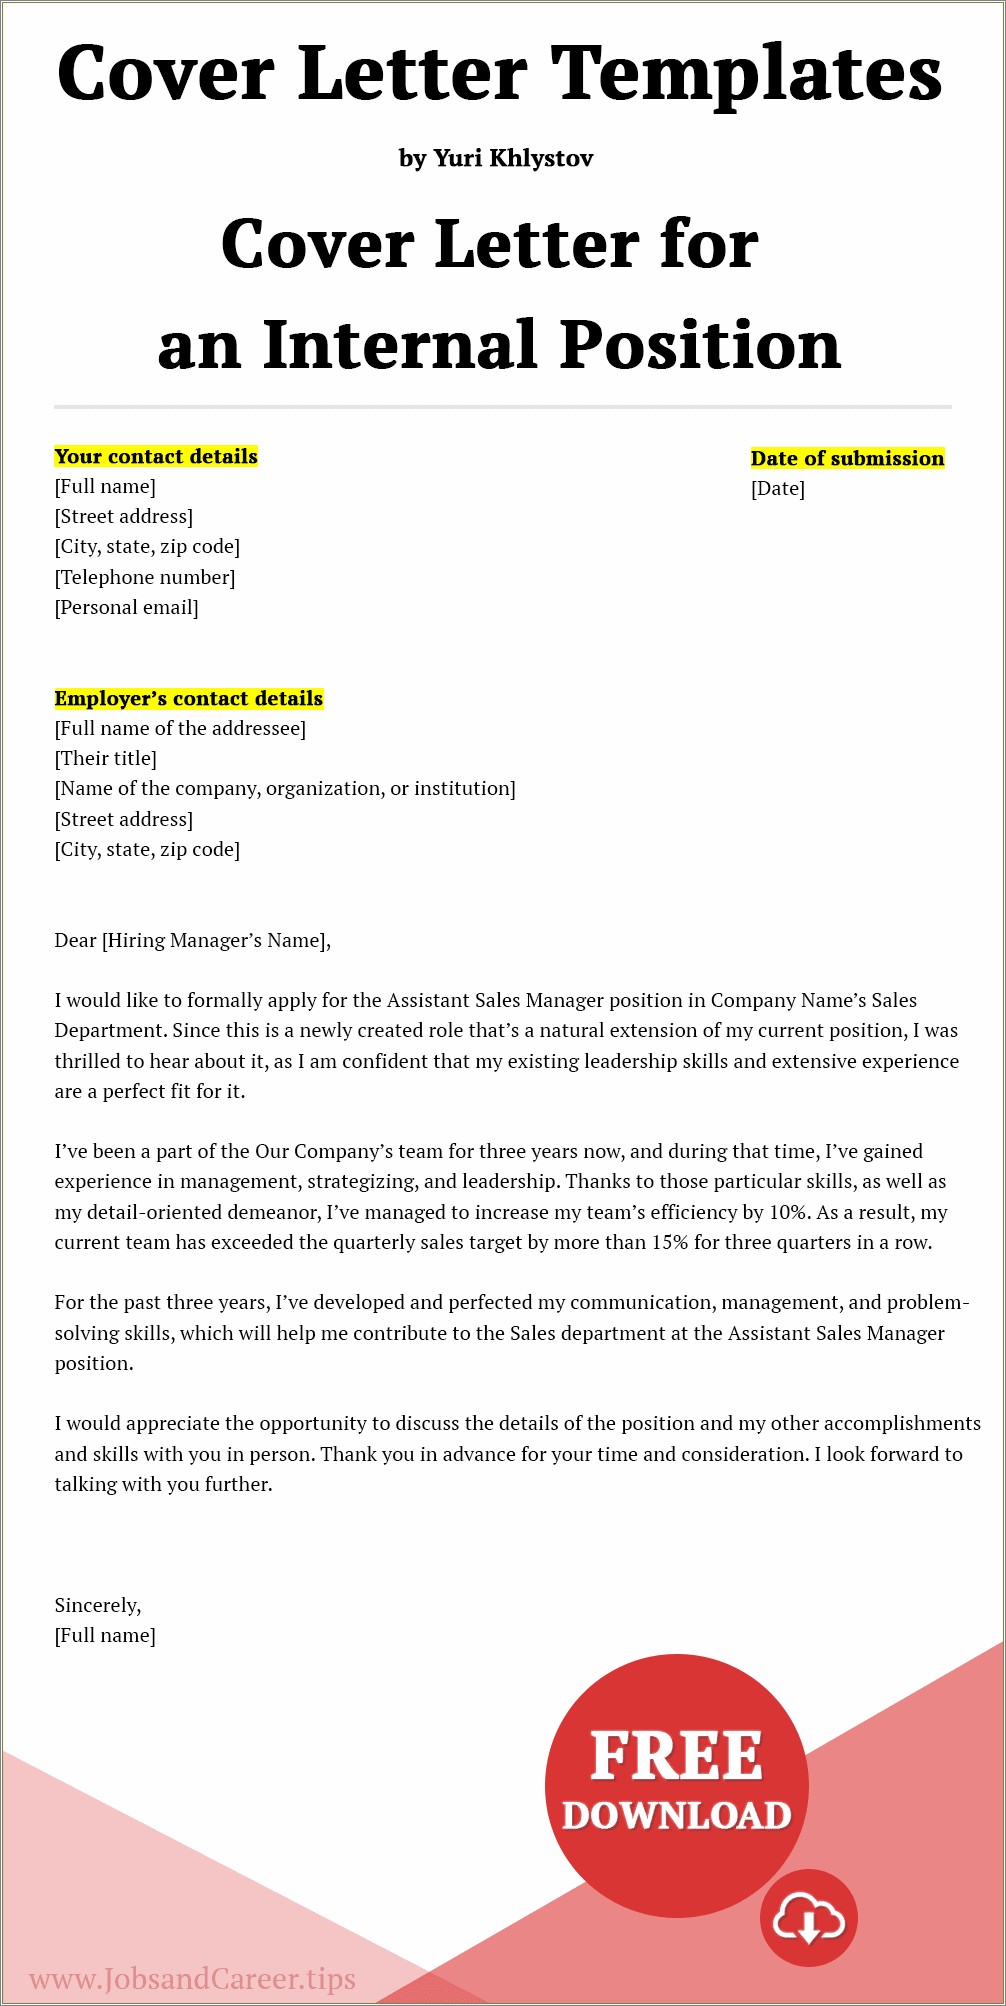 Download Template For Cover Letter Free